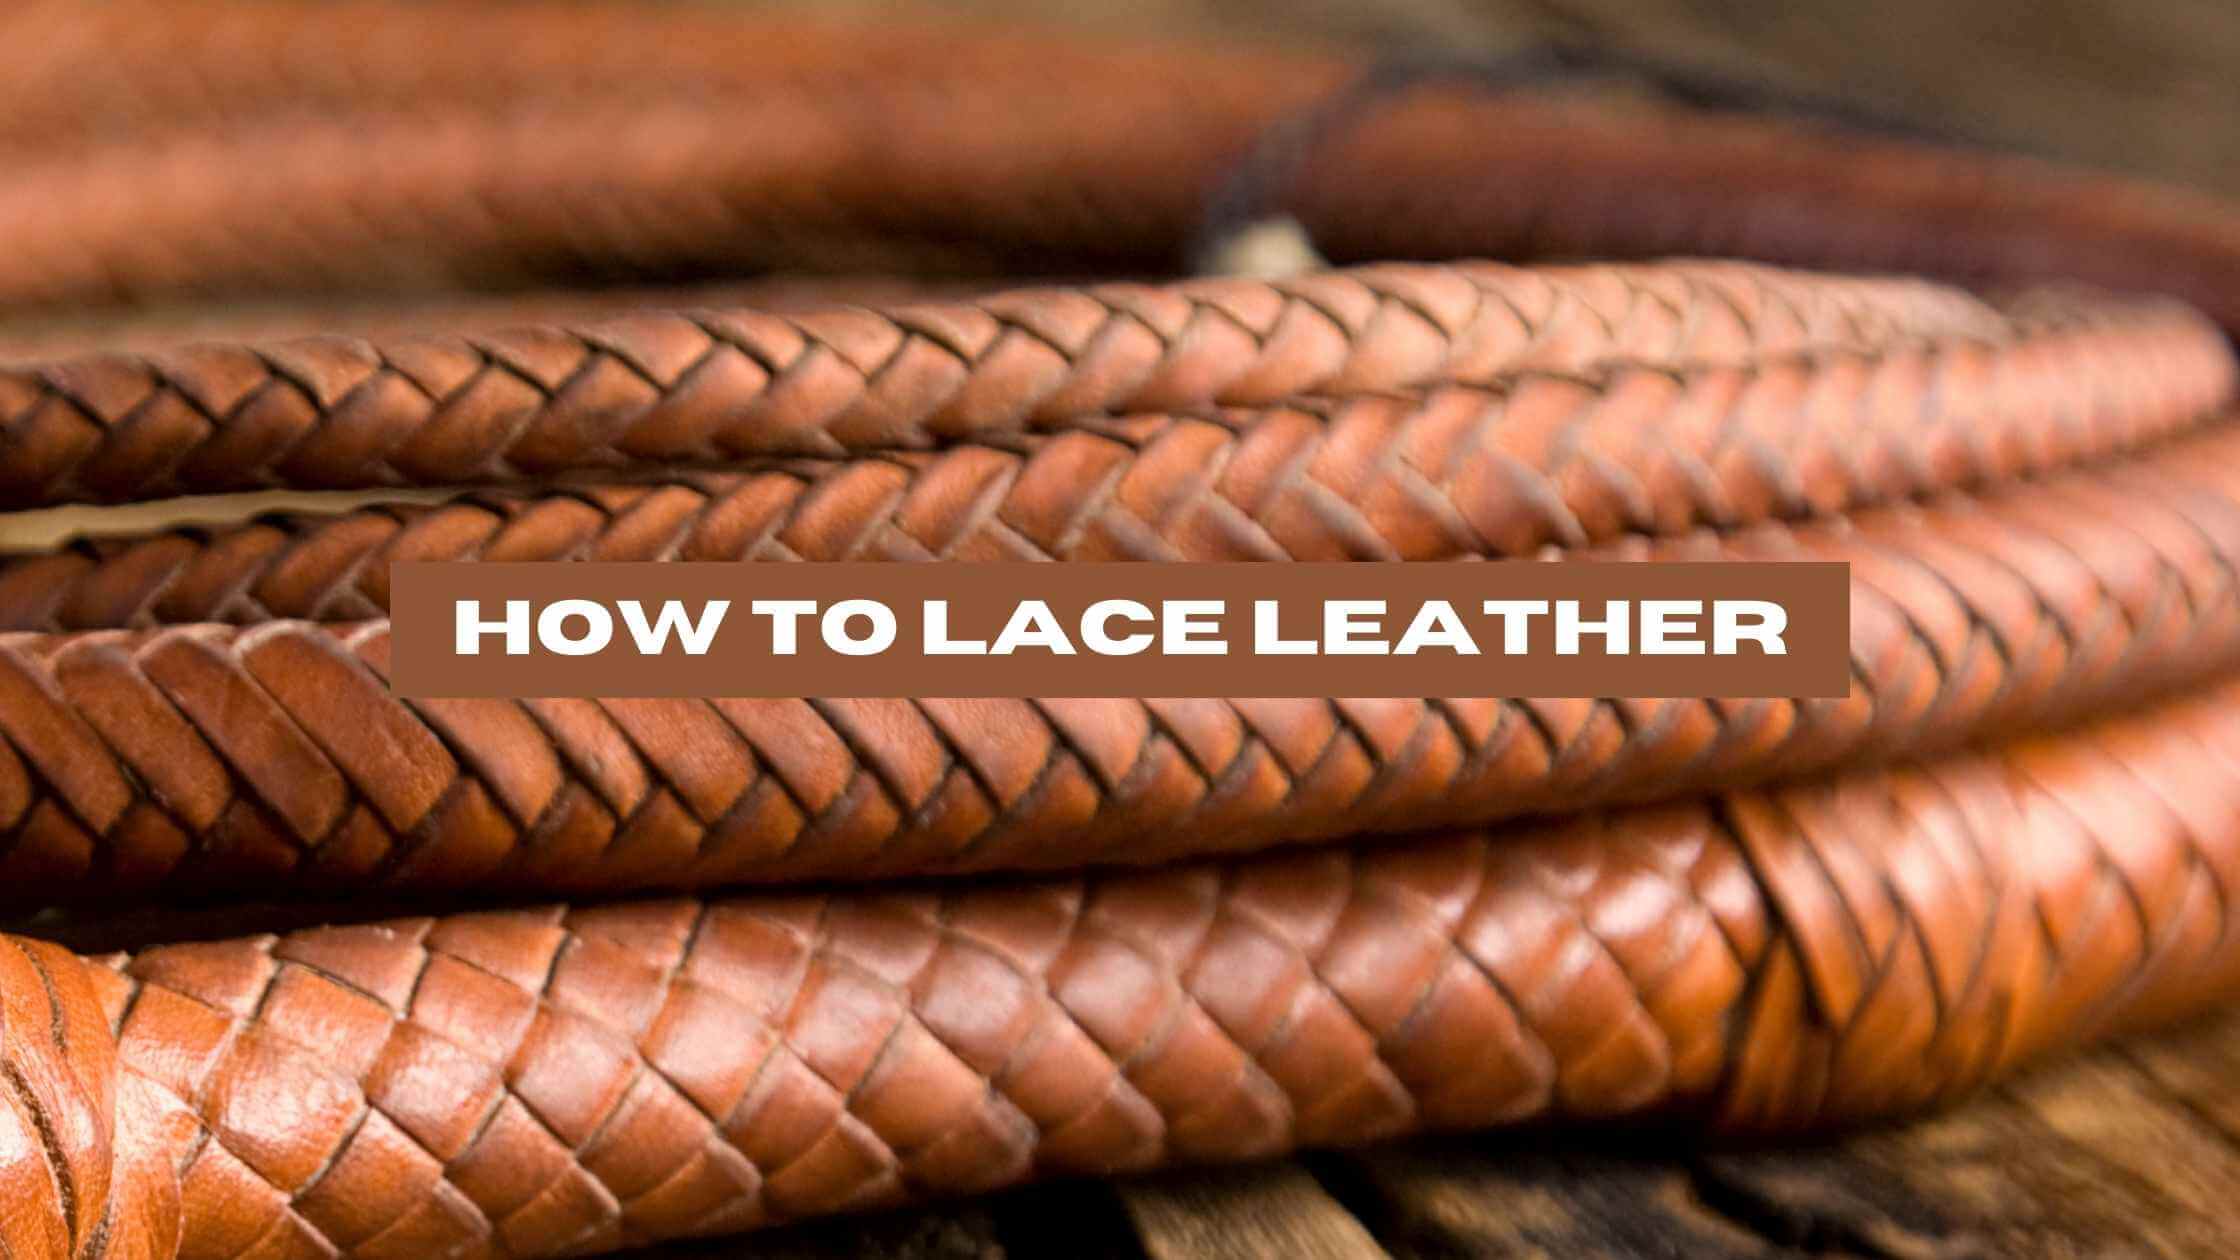 How to Lace Leather (A Step-by-Step Guide)